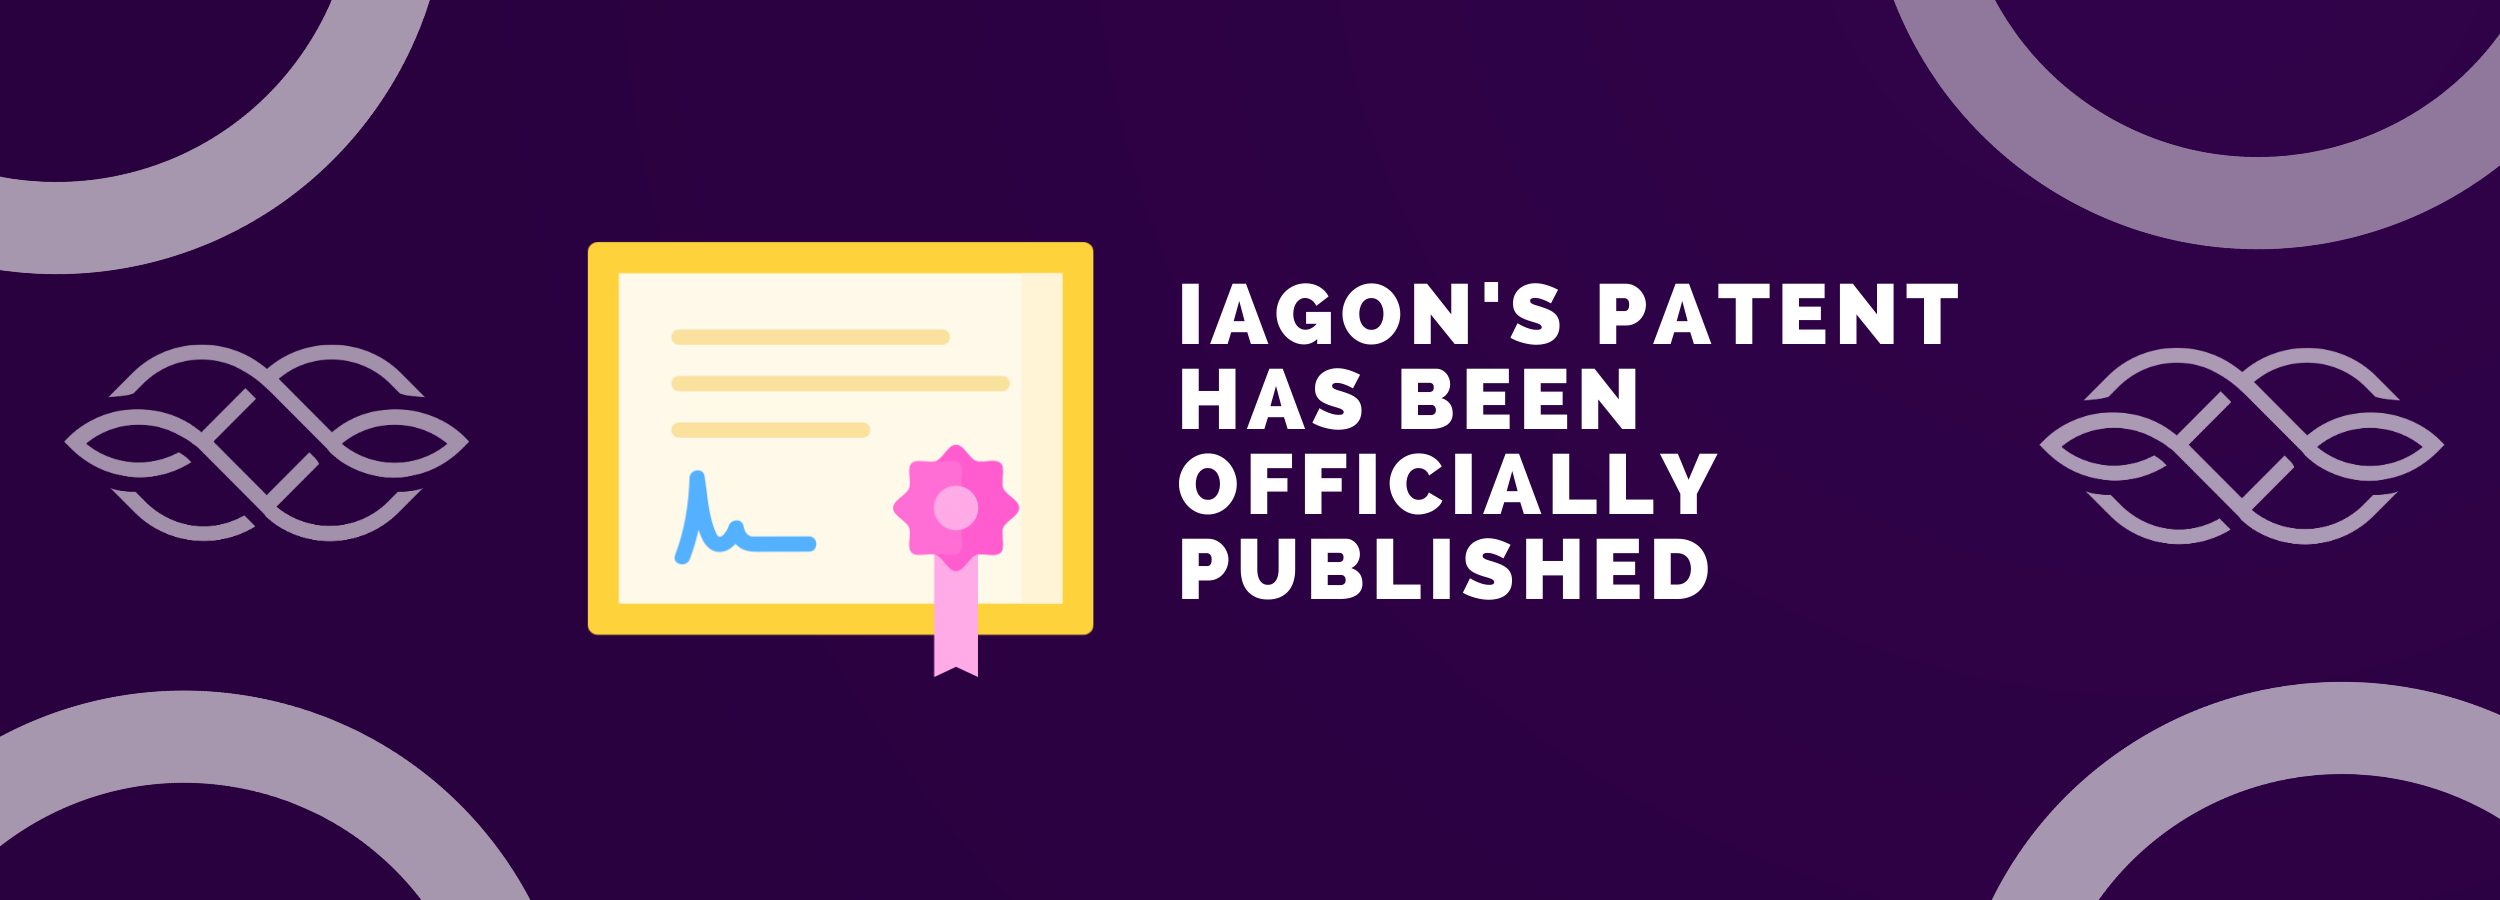 IAGON’s Patent Has Been Officially Published